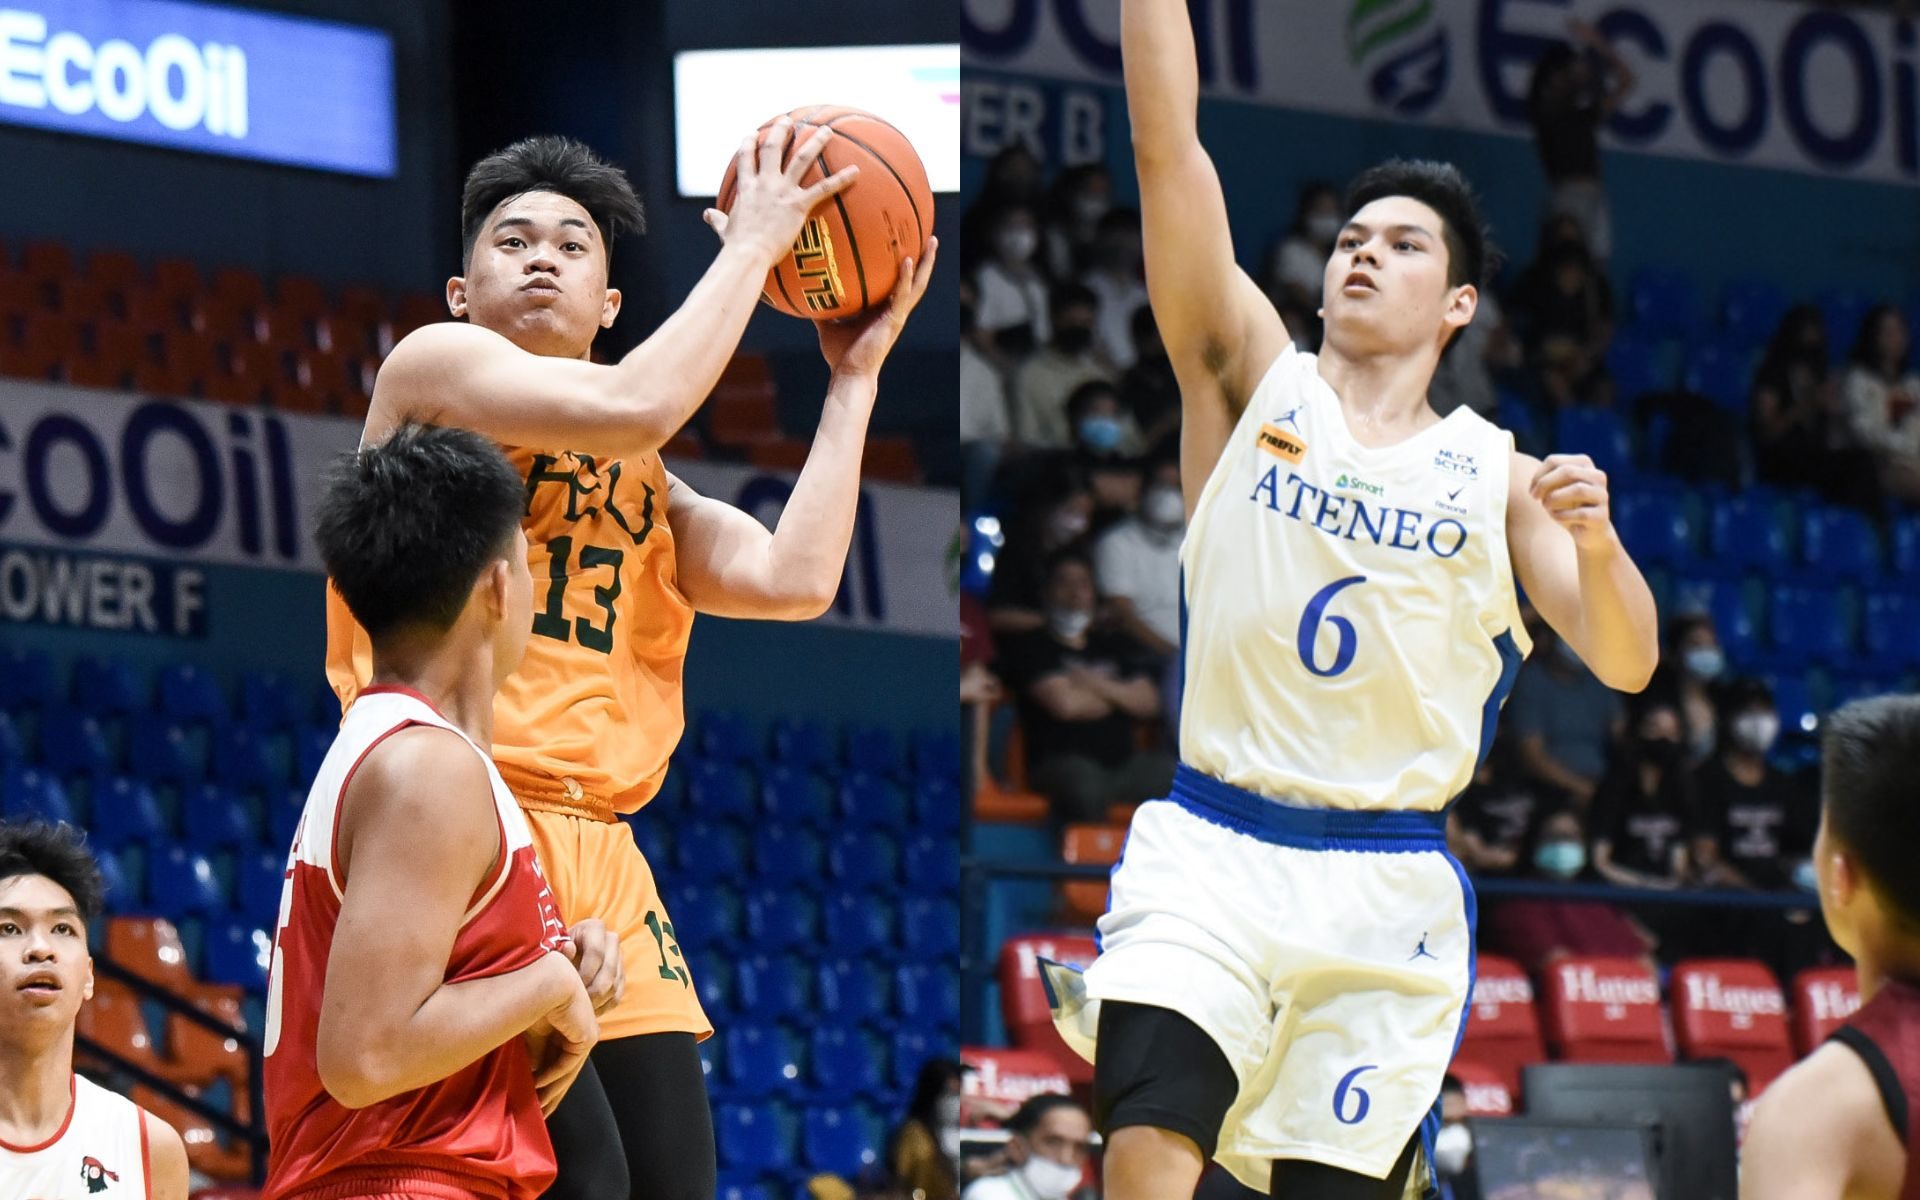 Janrey Pasaol, Lebron Nieto live up to family names in FEU, Ateneo routs